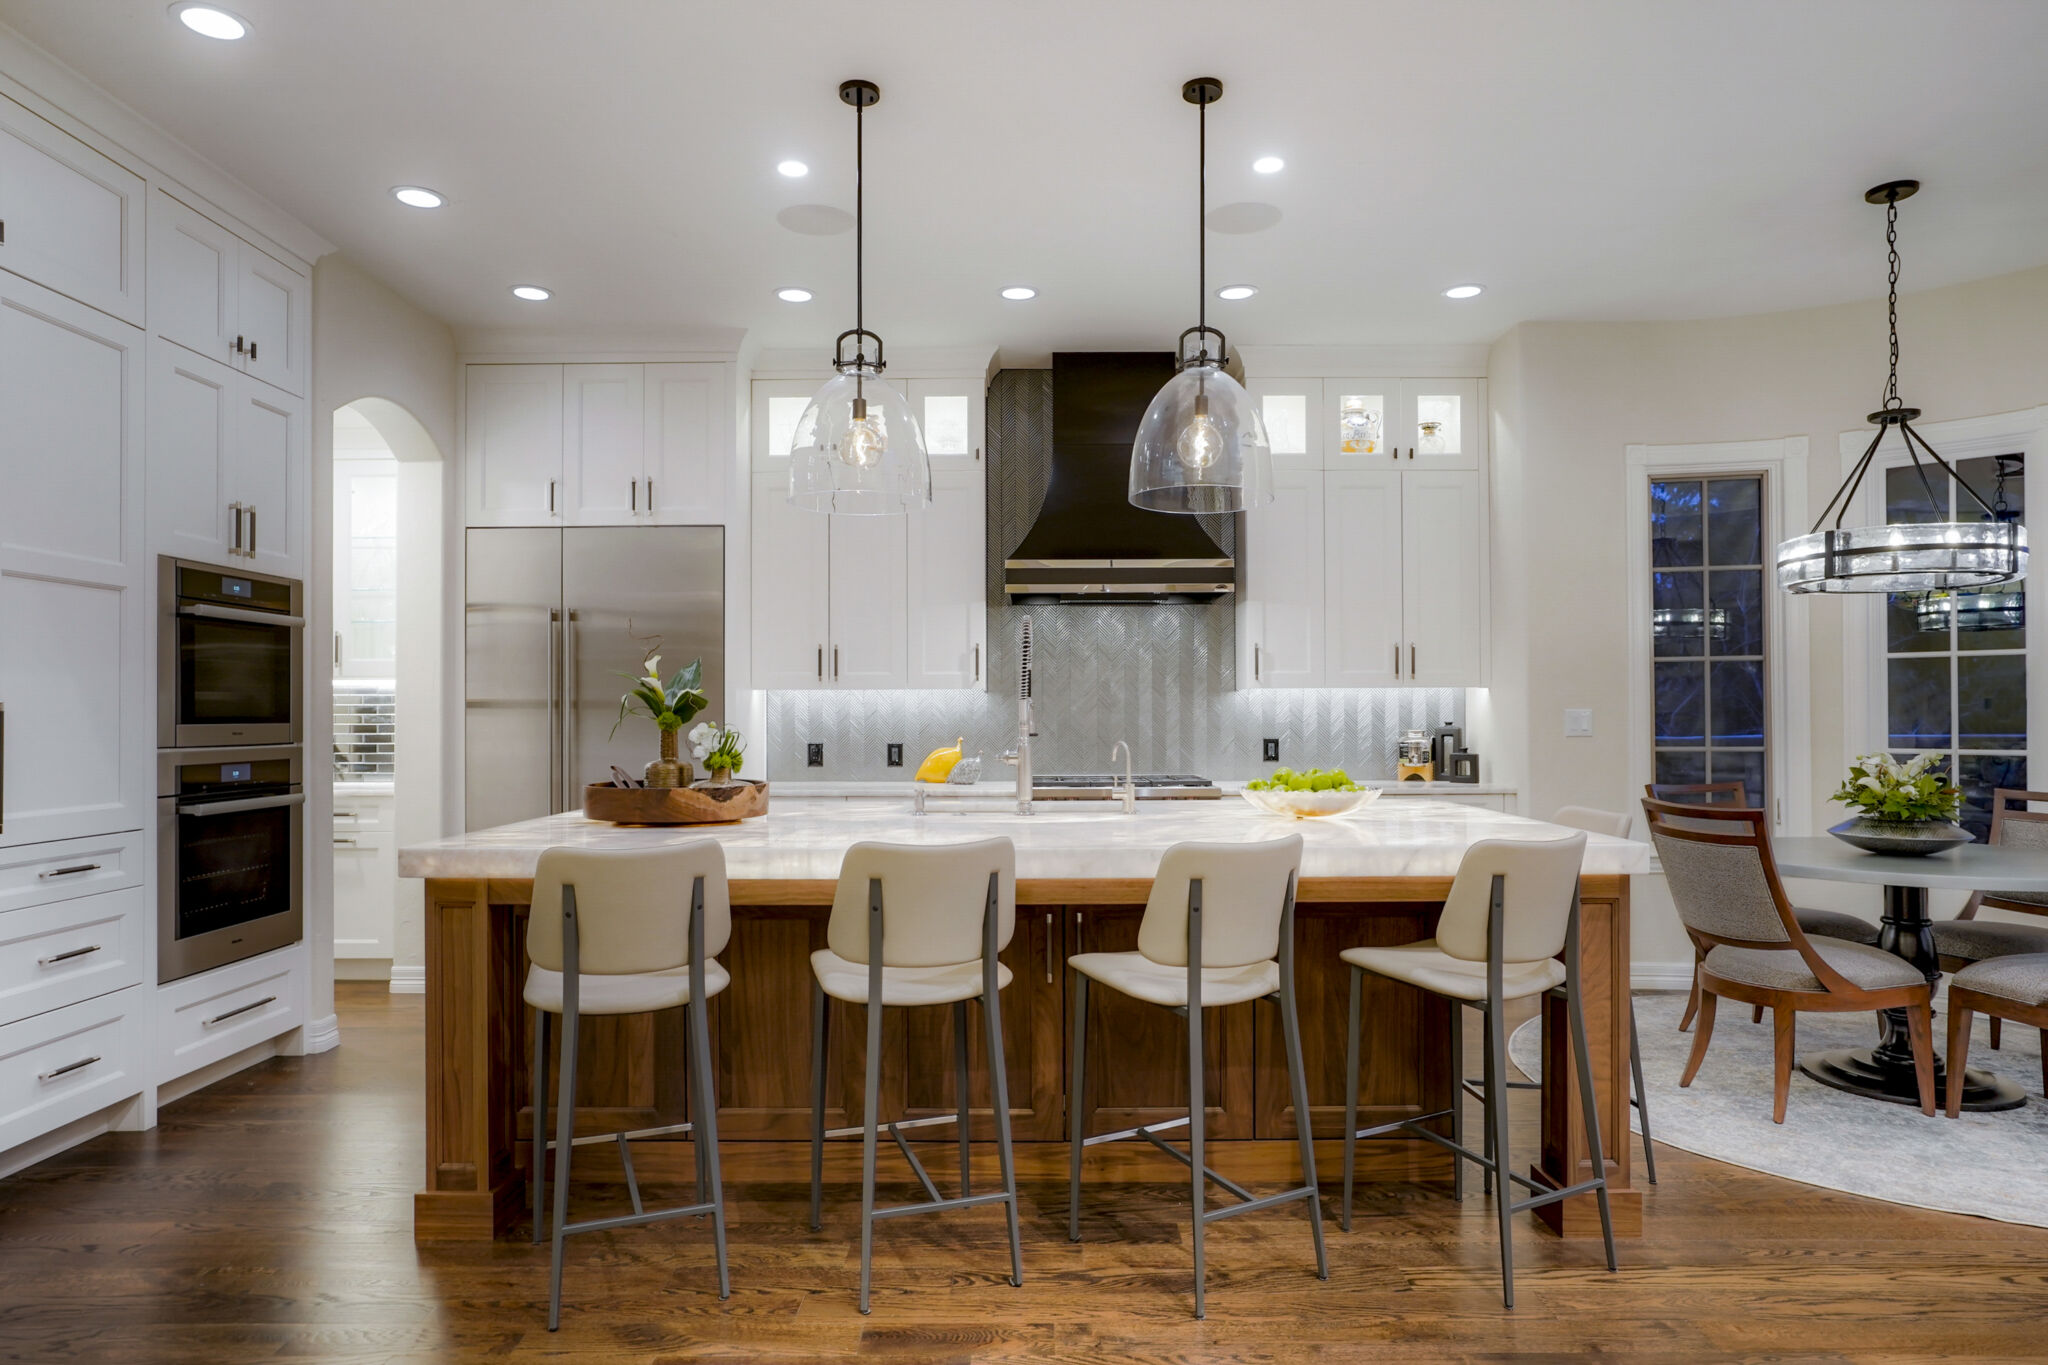 Remodeled kitchen with white Shaker cabinets and underlit countertops